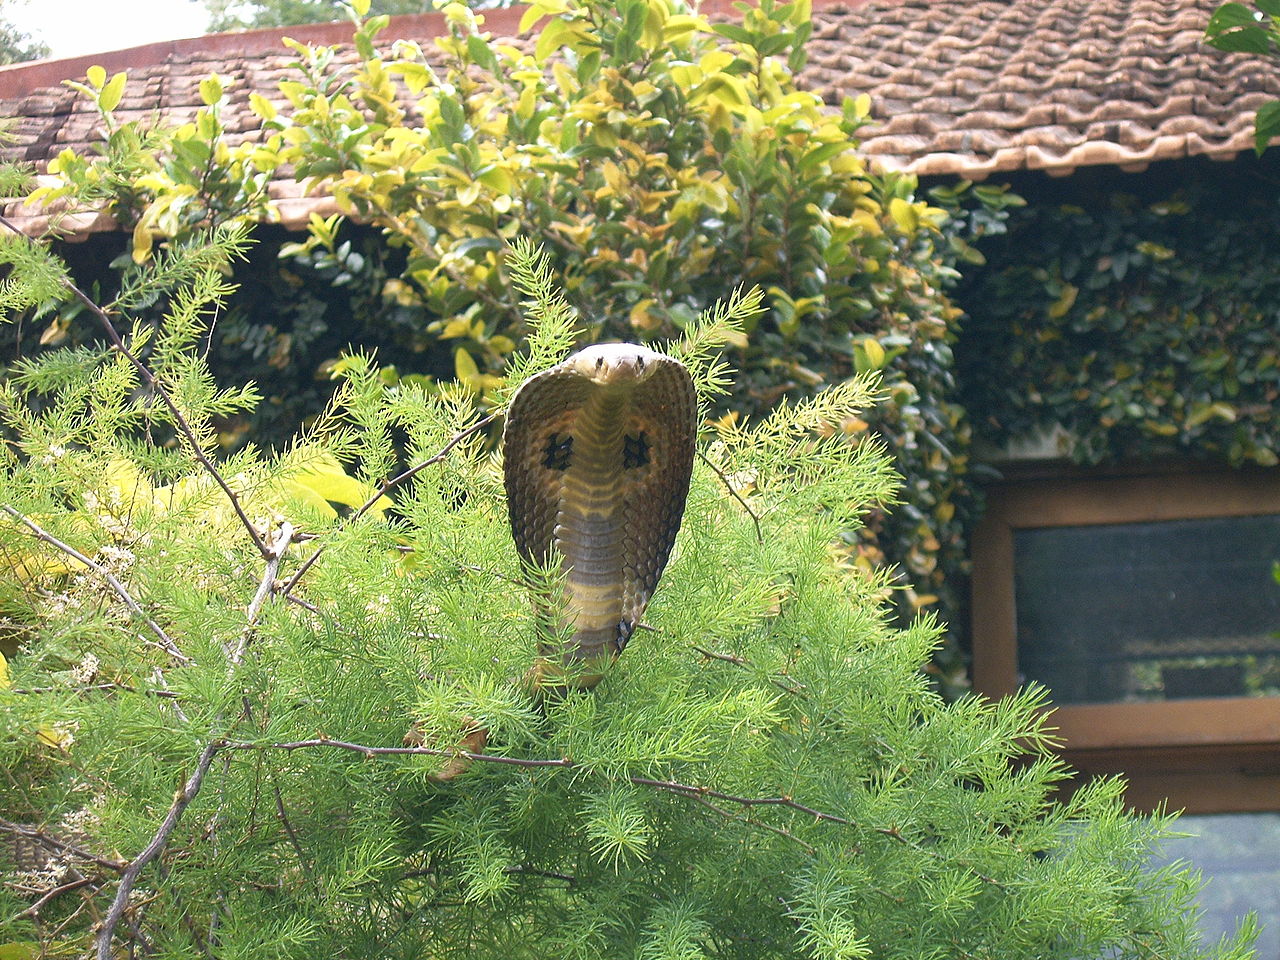 Indian cobra on a tree